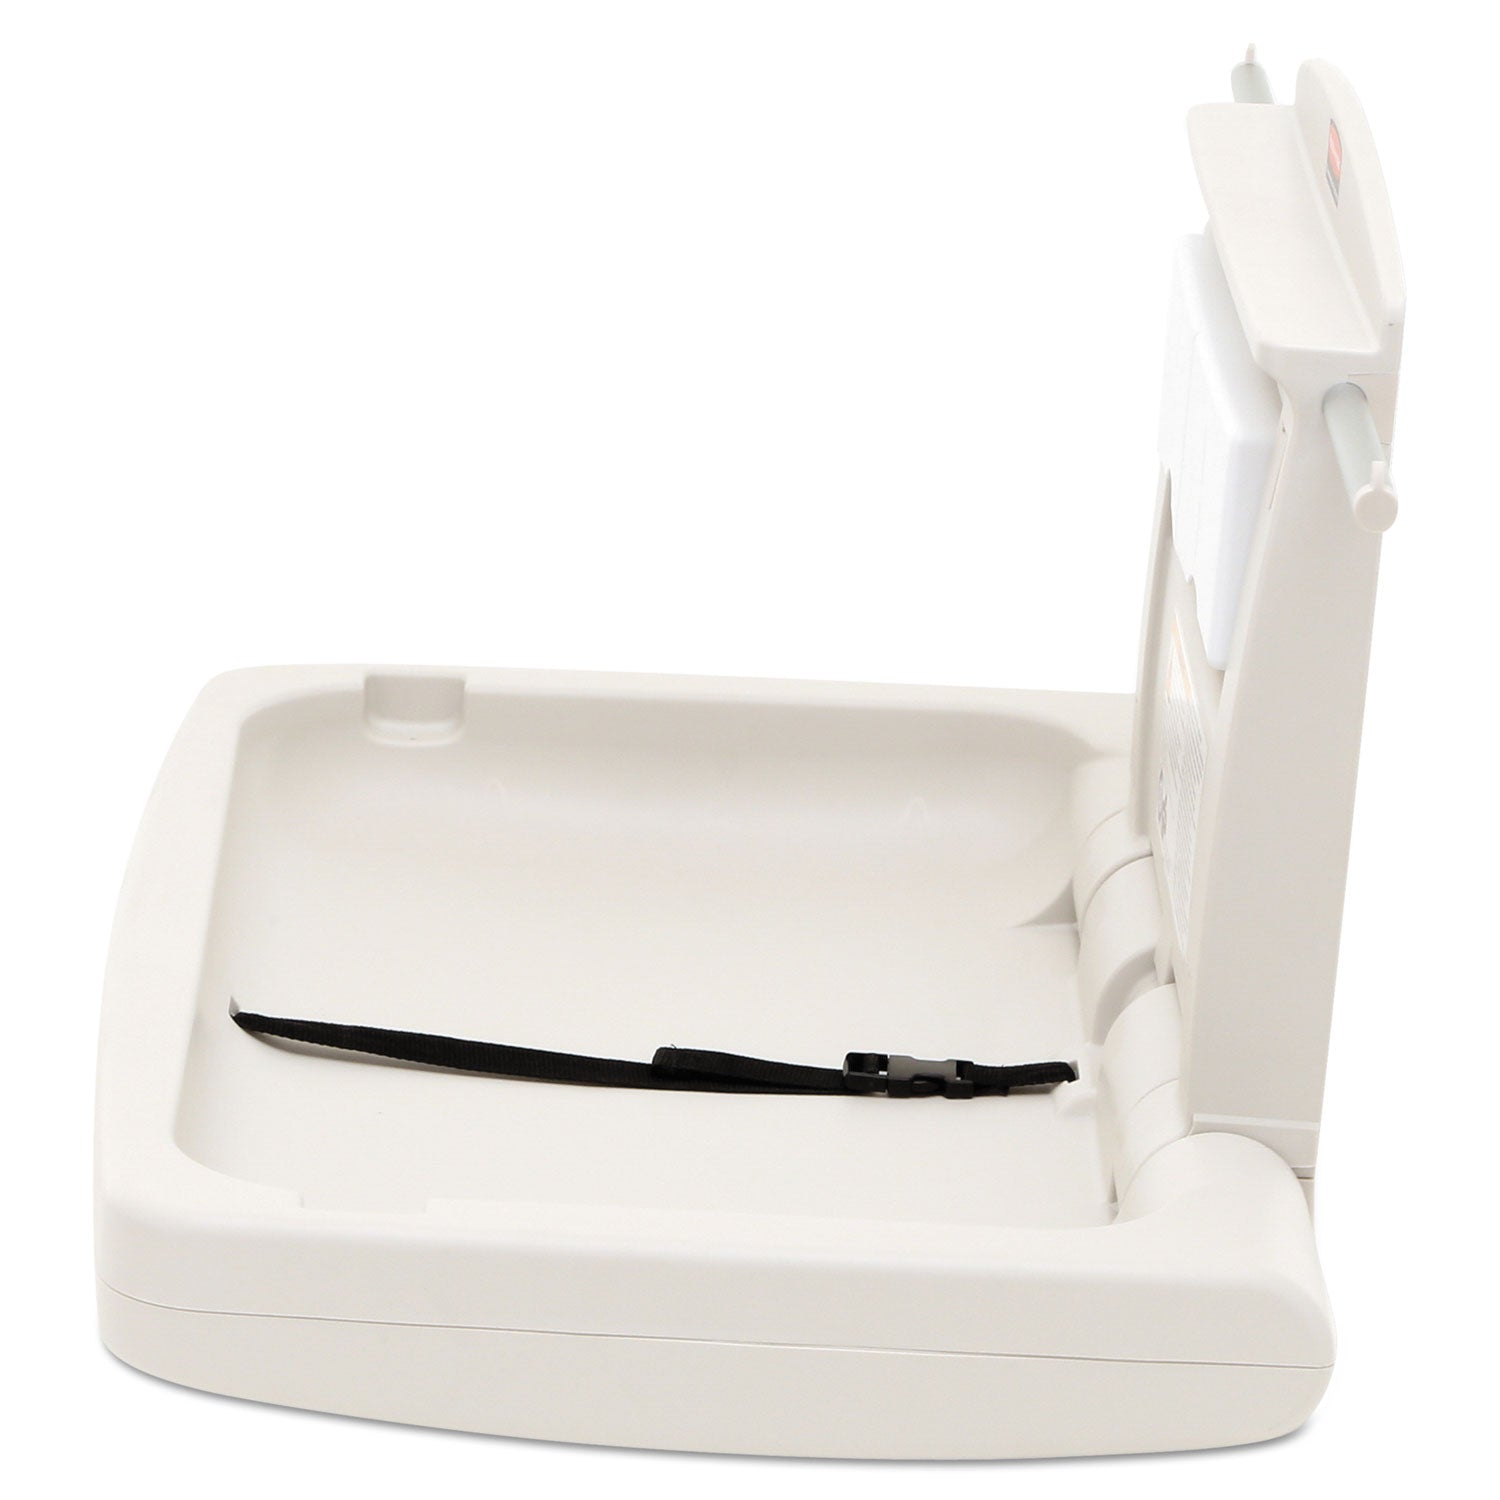 Sturdy Station 2 Baby Changing Table, 33.5 x 21.5, Platinum - 